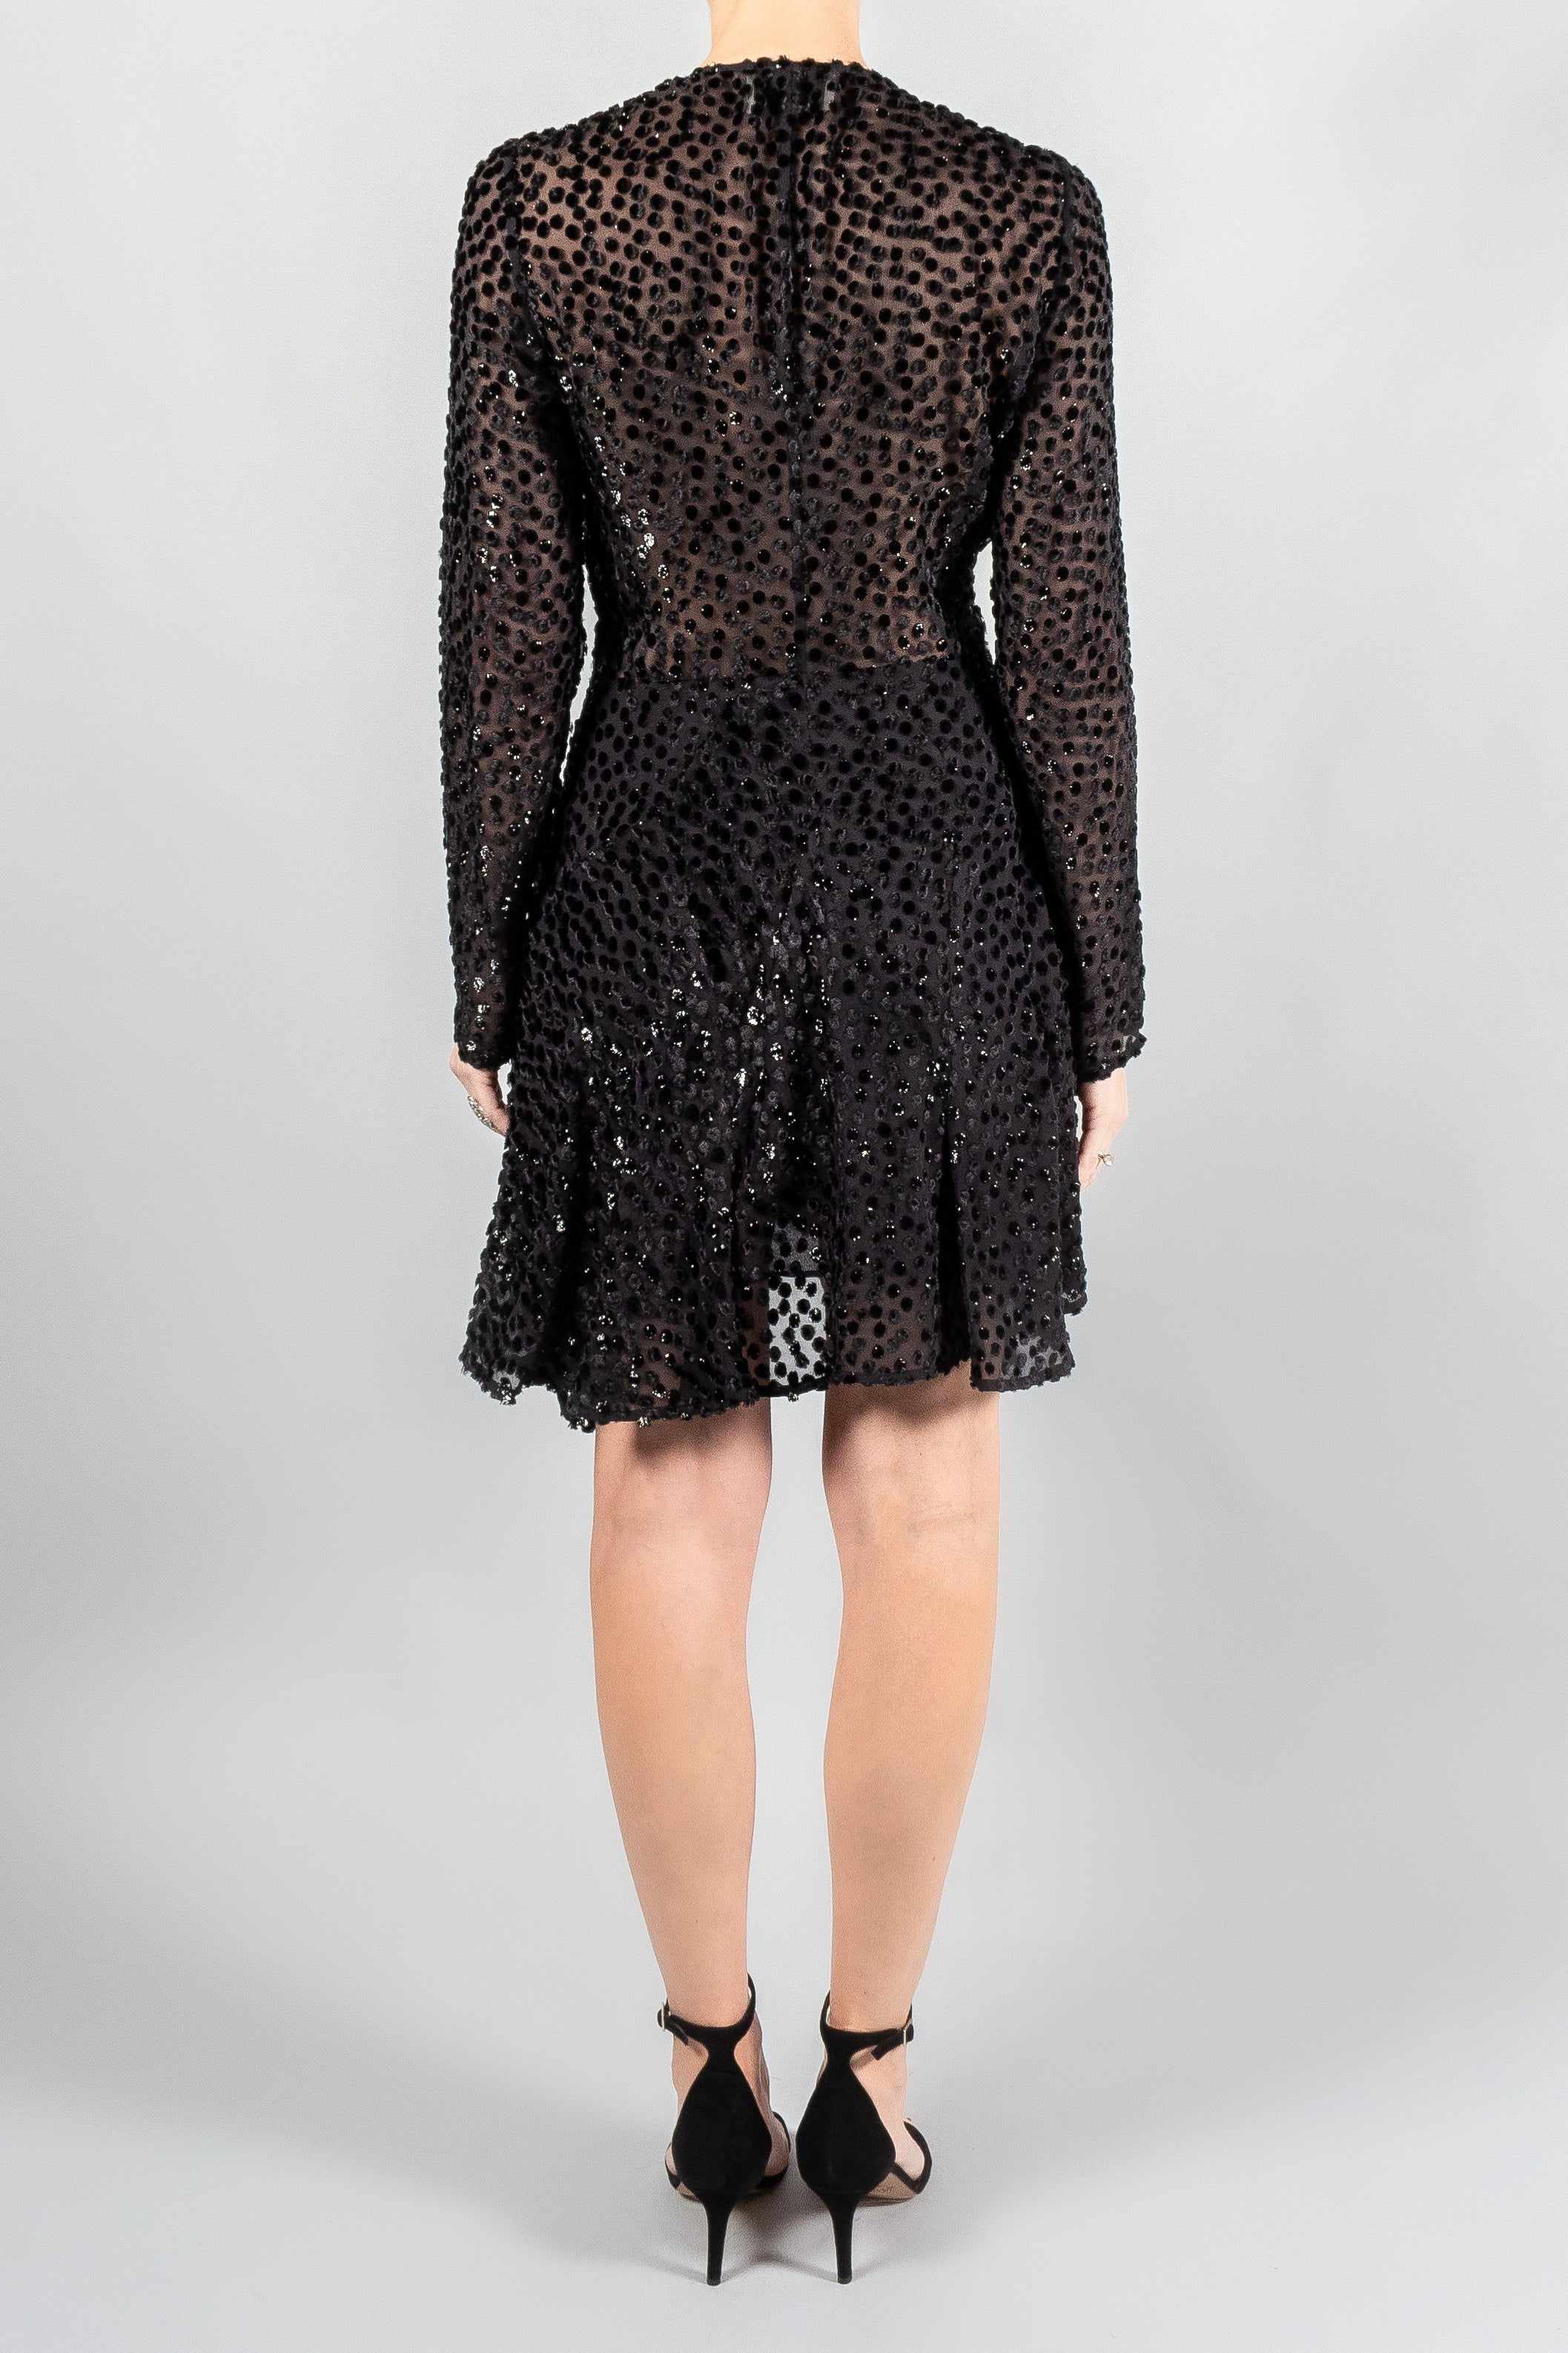 Isabel Marant Usmara Sparkly Dress-Dresses and Jumpsuits-Misch-Boutique-Vancouver-Canada-misch.ca